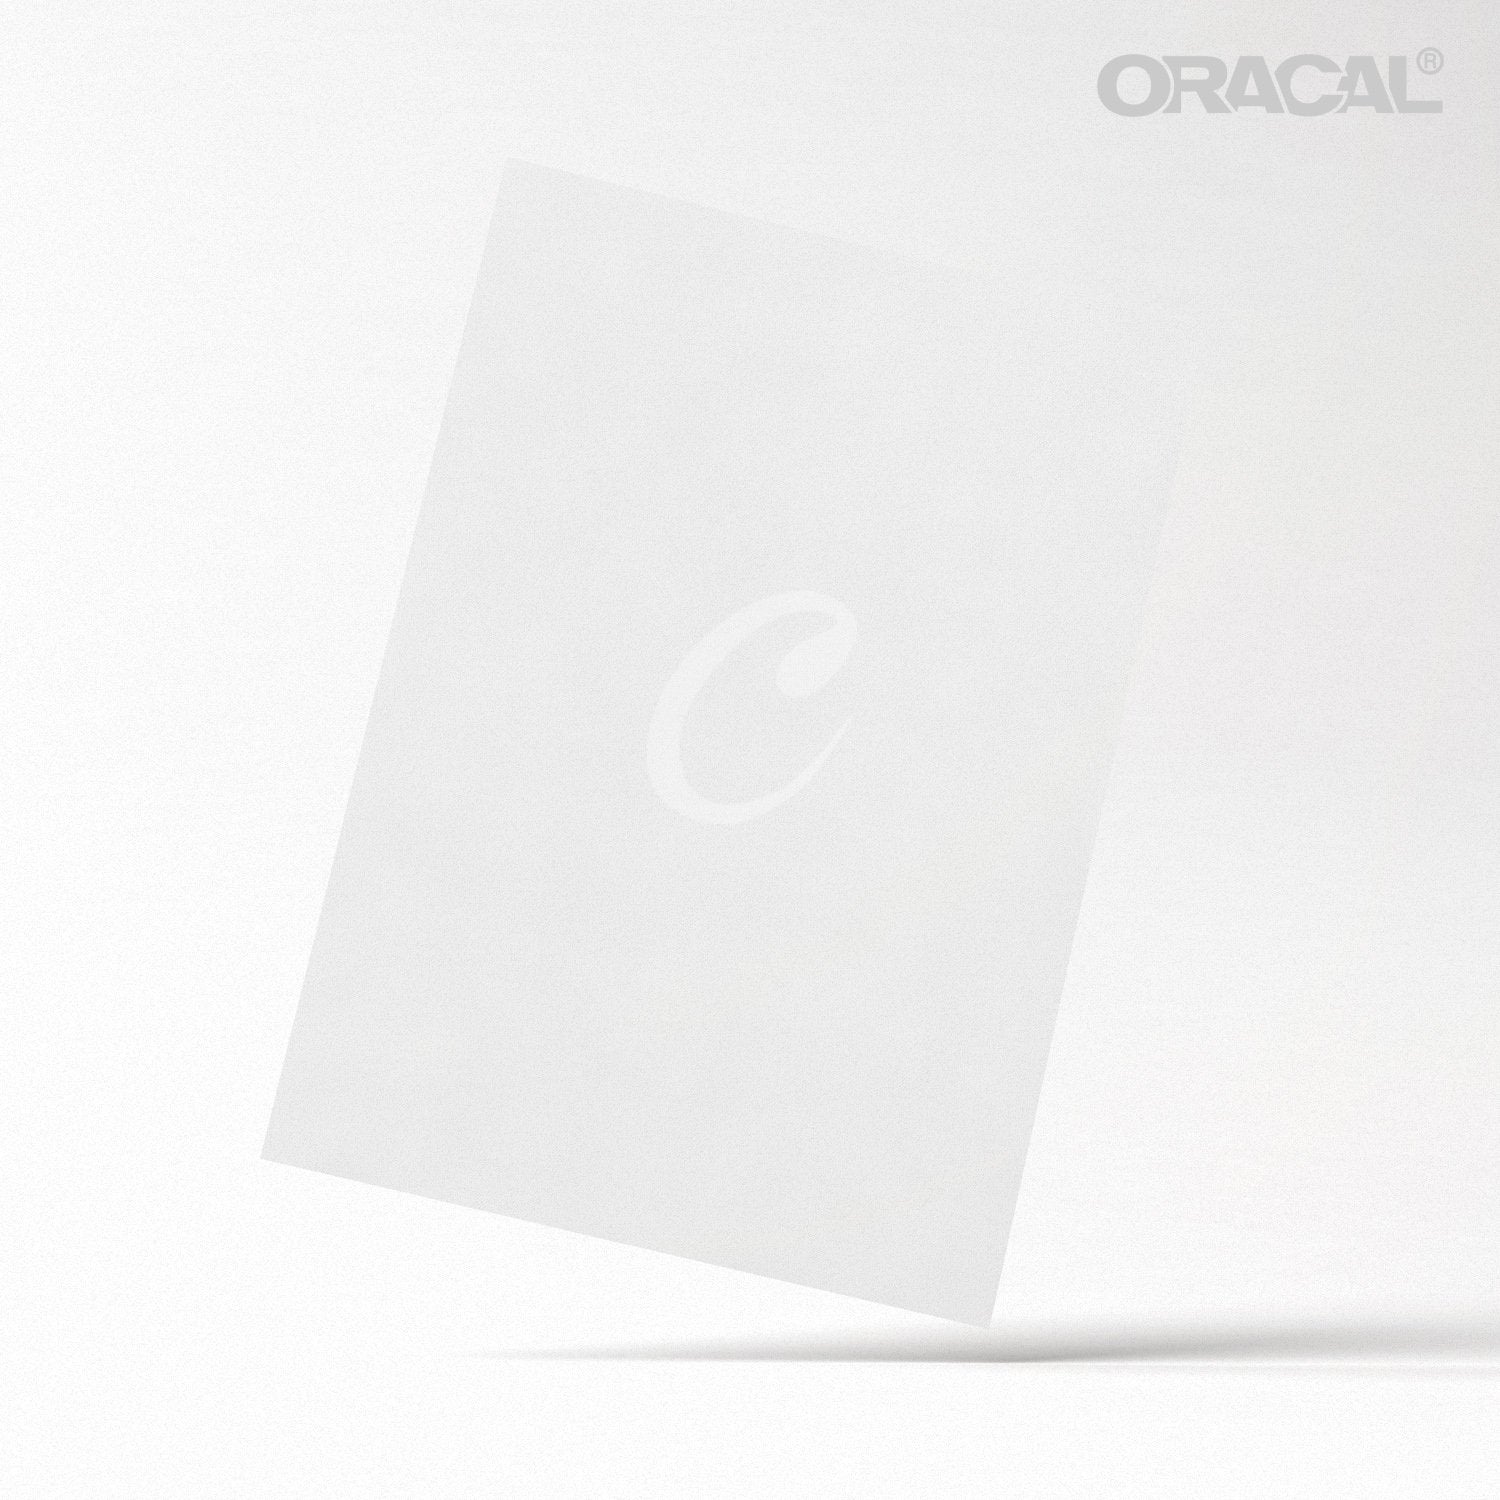 Oracal White Glossy